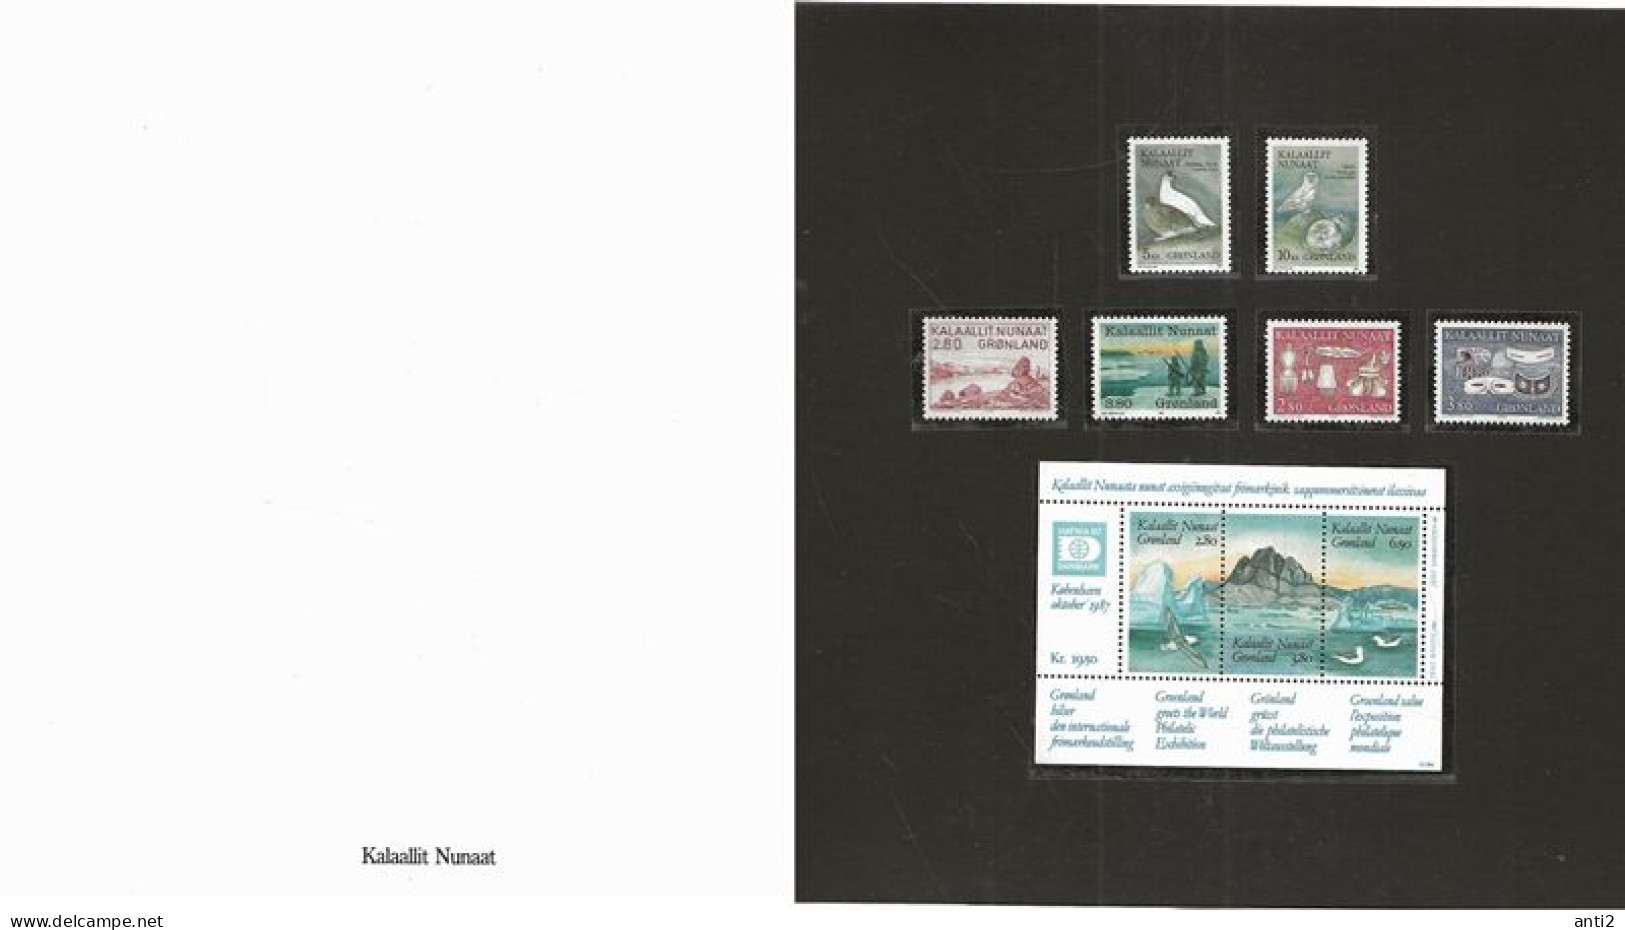 Greenland  1987  Folder With Stamps Issued 1987 Before The CEPT's 13. Conference In Copenhagen, Mint Stamps - Covers & Documents